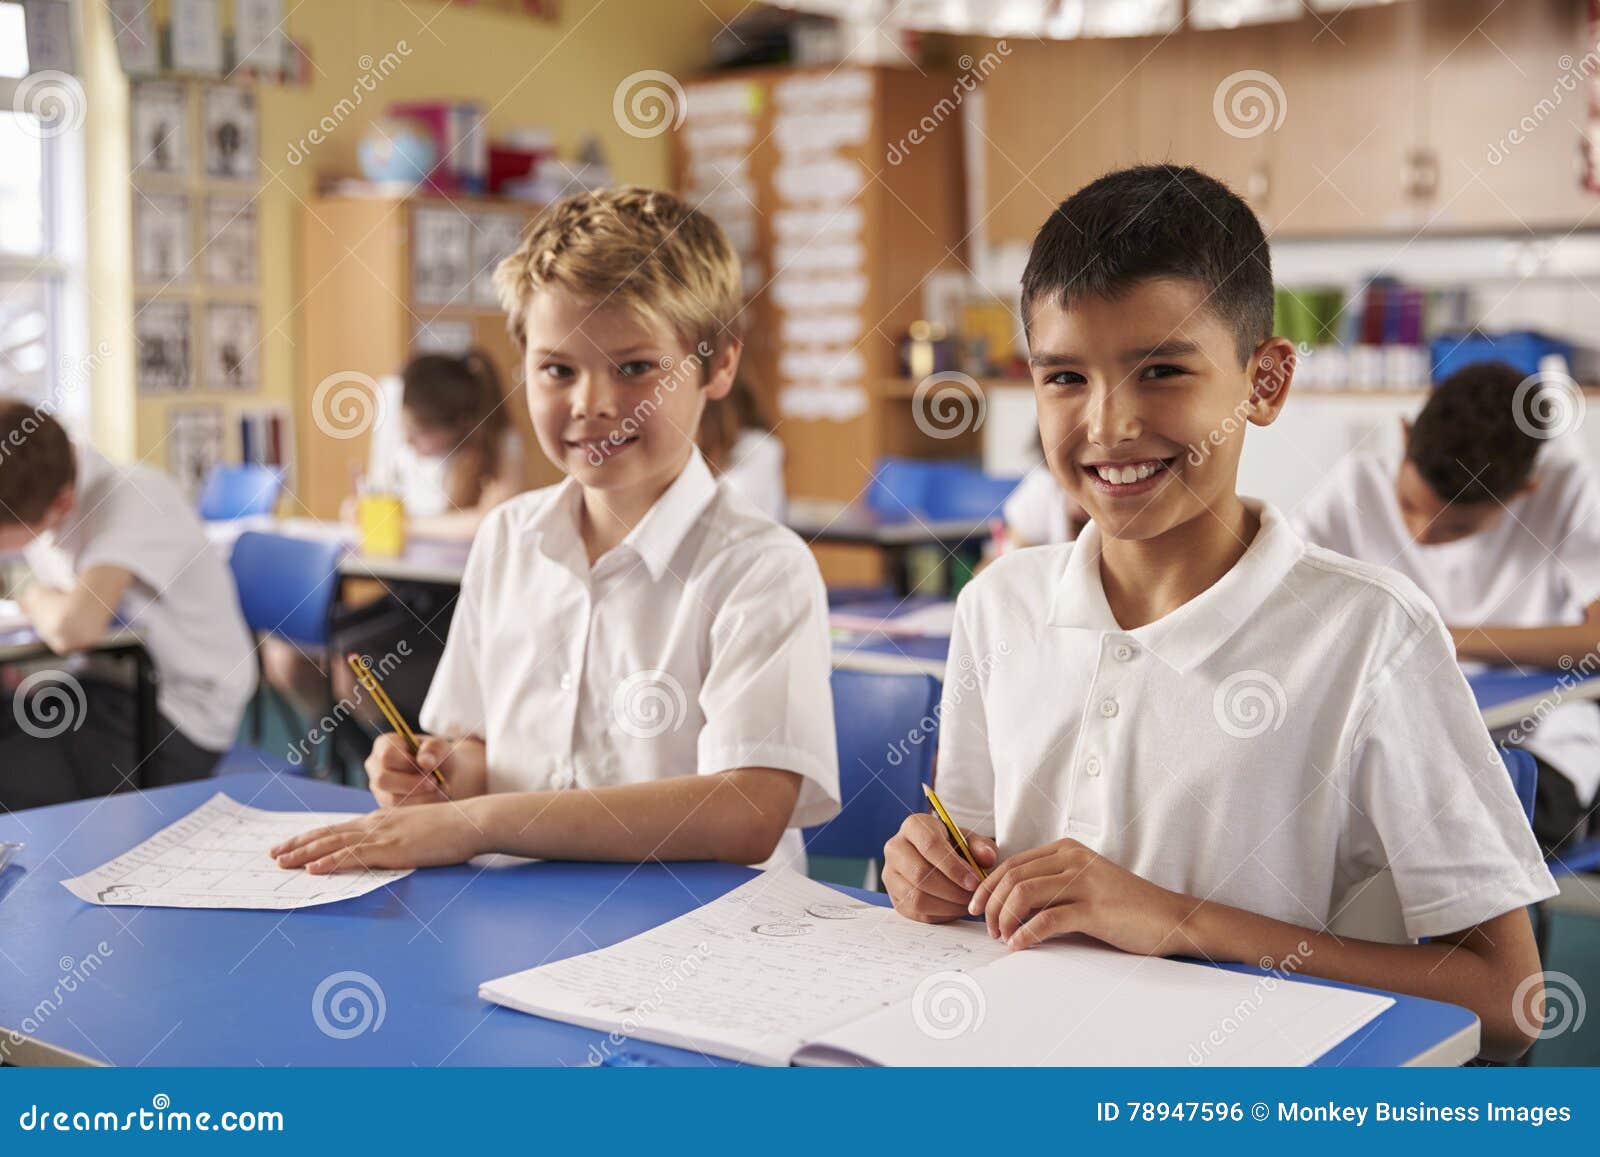 two schoolboys in a primary school class, looking to camera